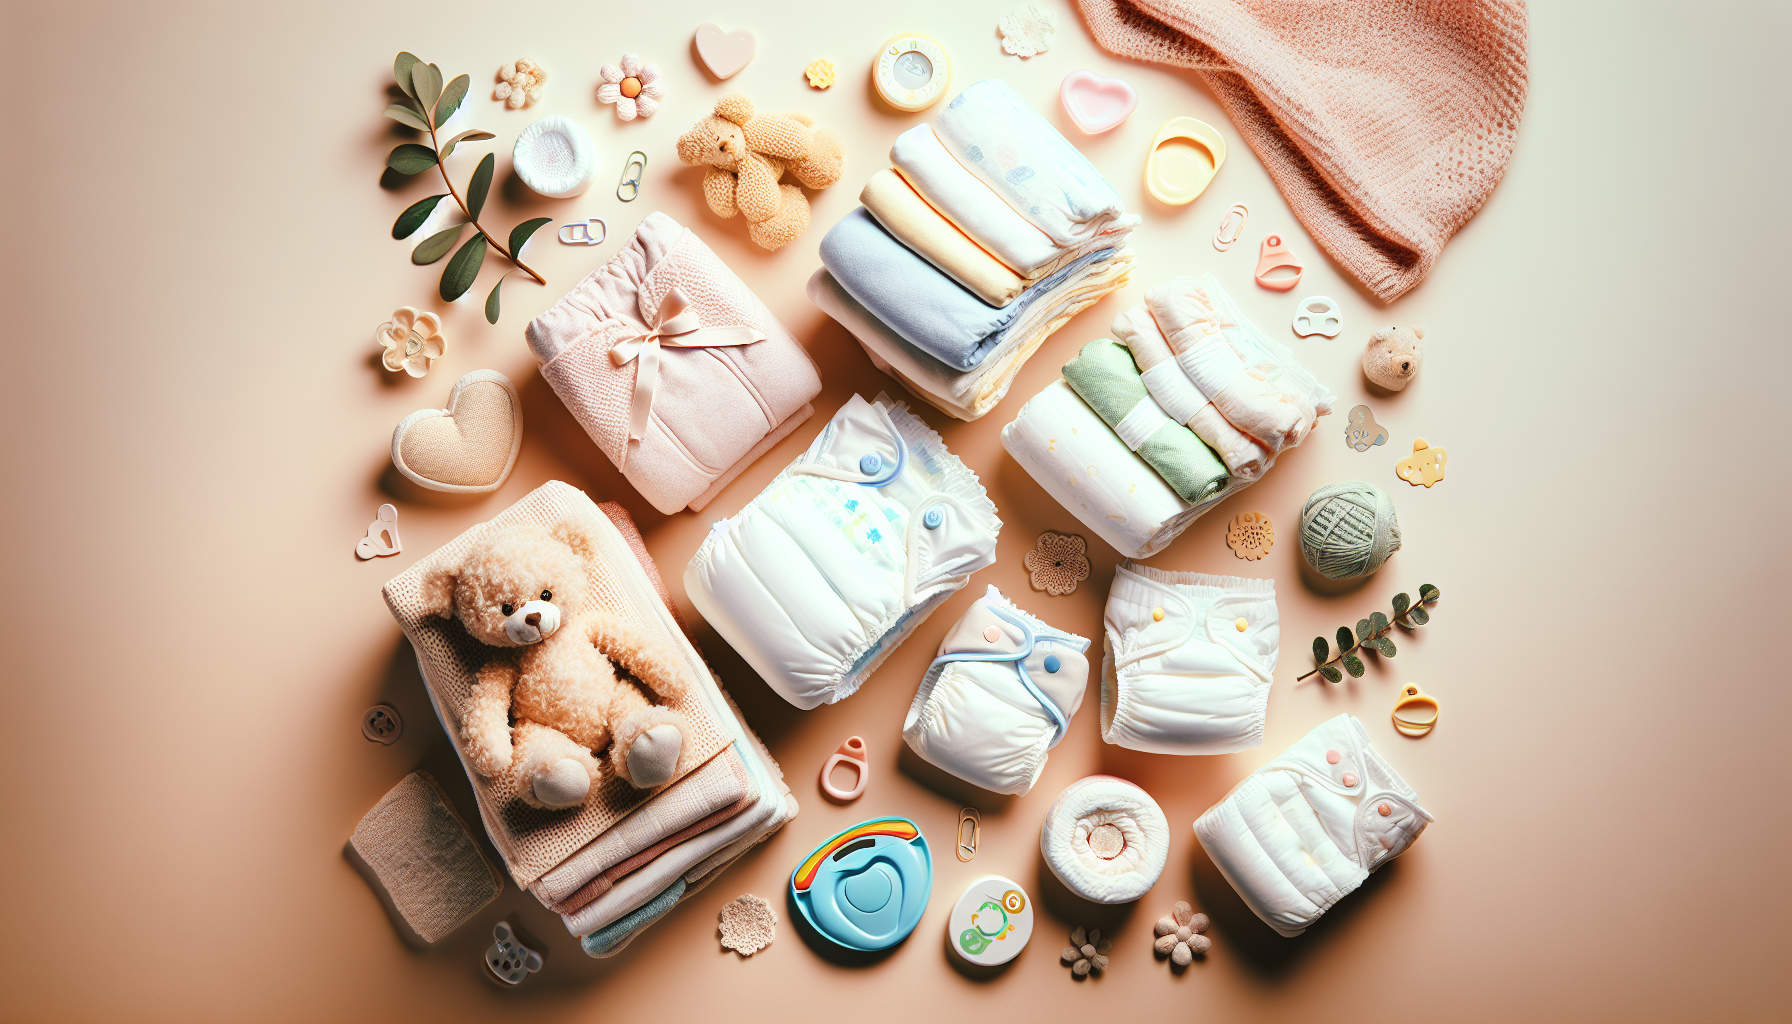 Your Babys Comfort: The Ultimate Guide to Diapers for New Parents